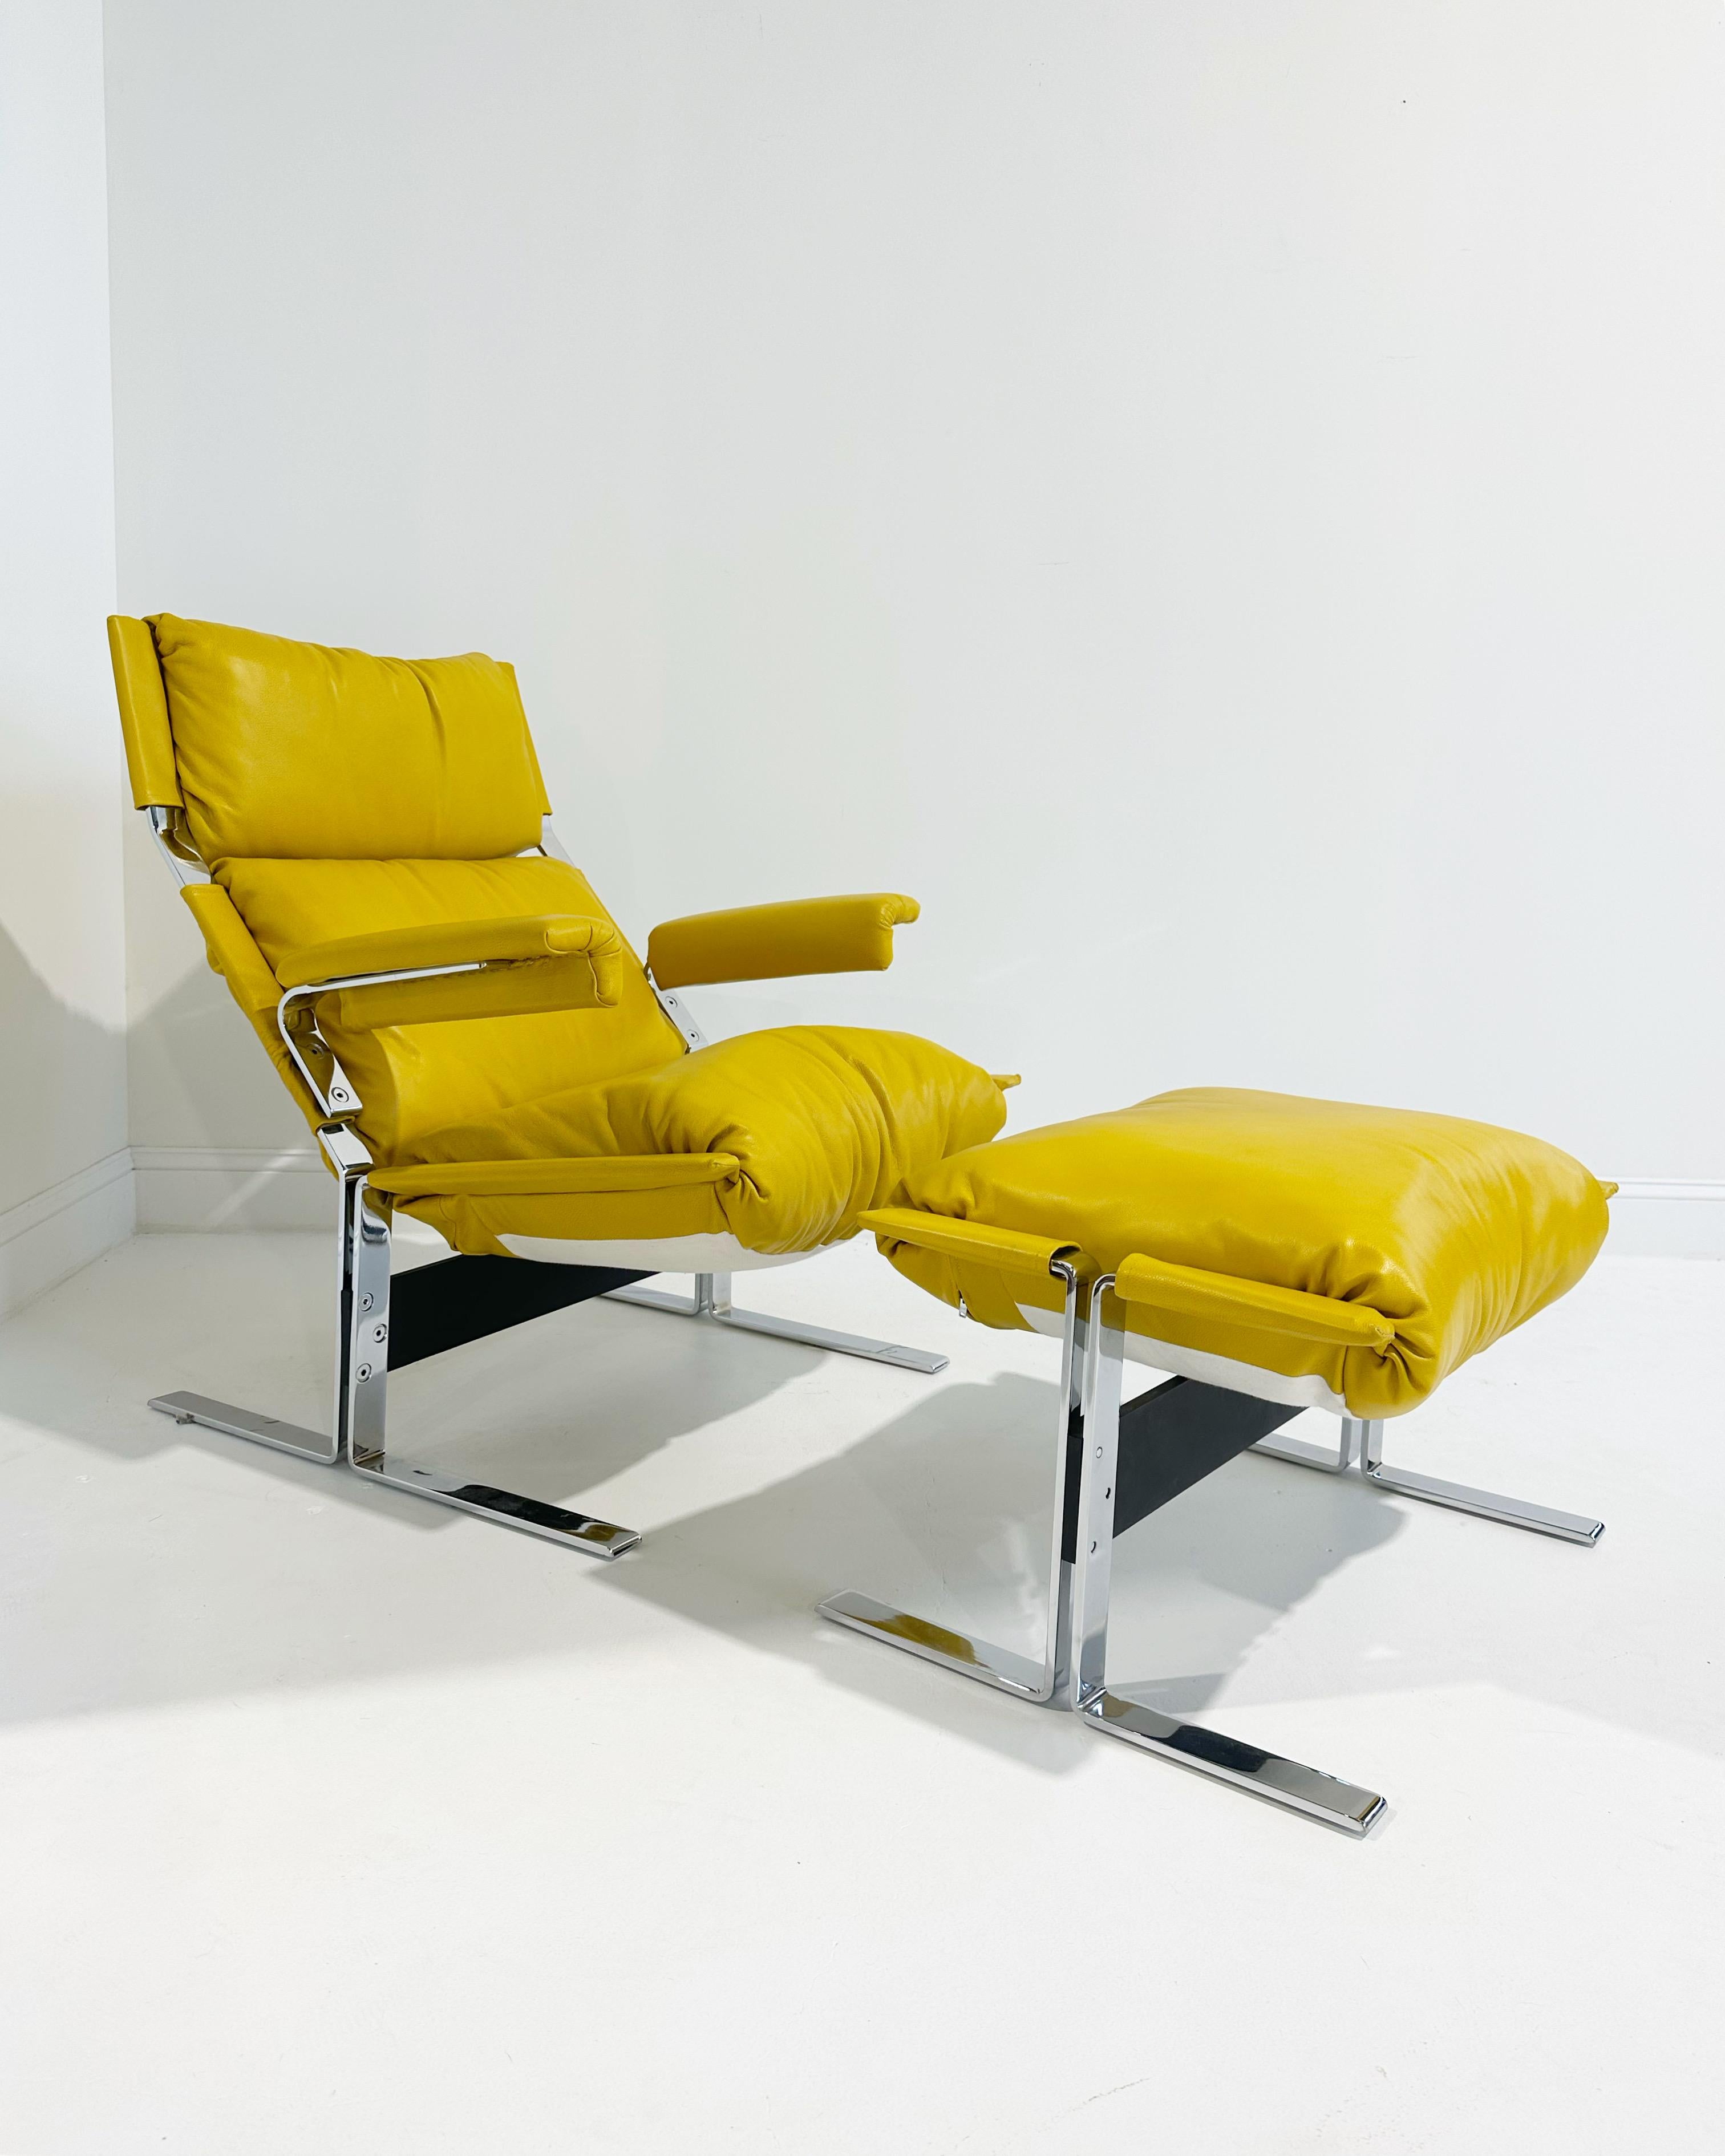 Steel Vintage Richard Hersberger Lounge Chair and Ottoman For Sale